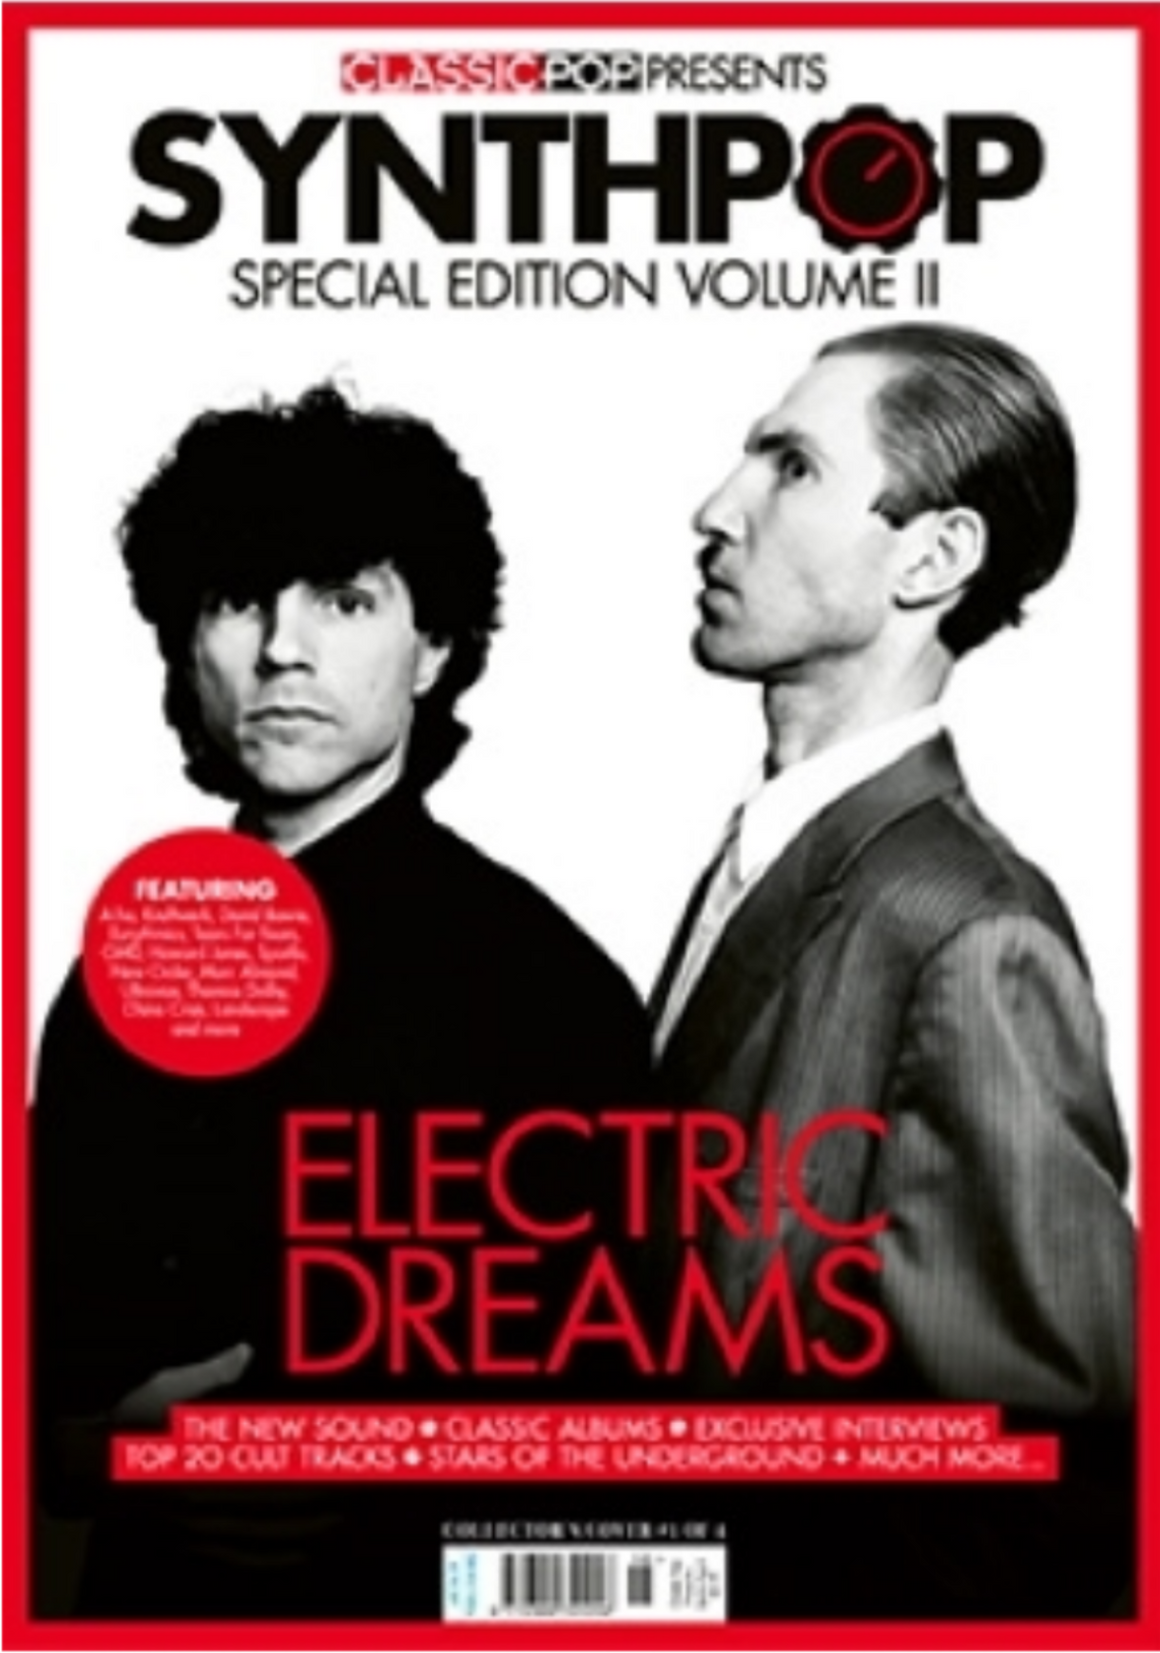 CLASSIC POP PRESENTS magazine October 2020 - SPARKS SYNTH-POP SPECIAL COVER